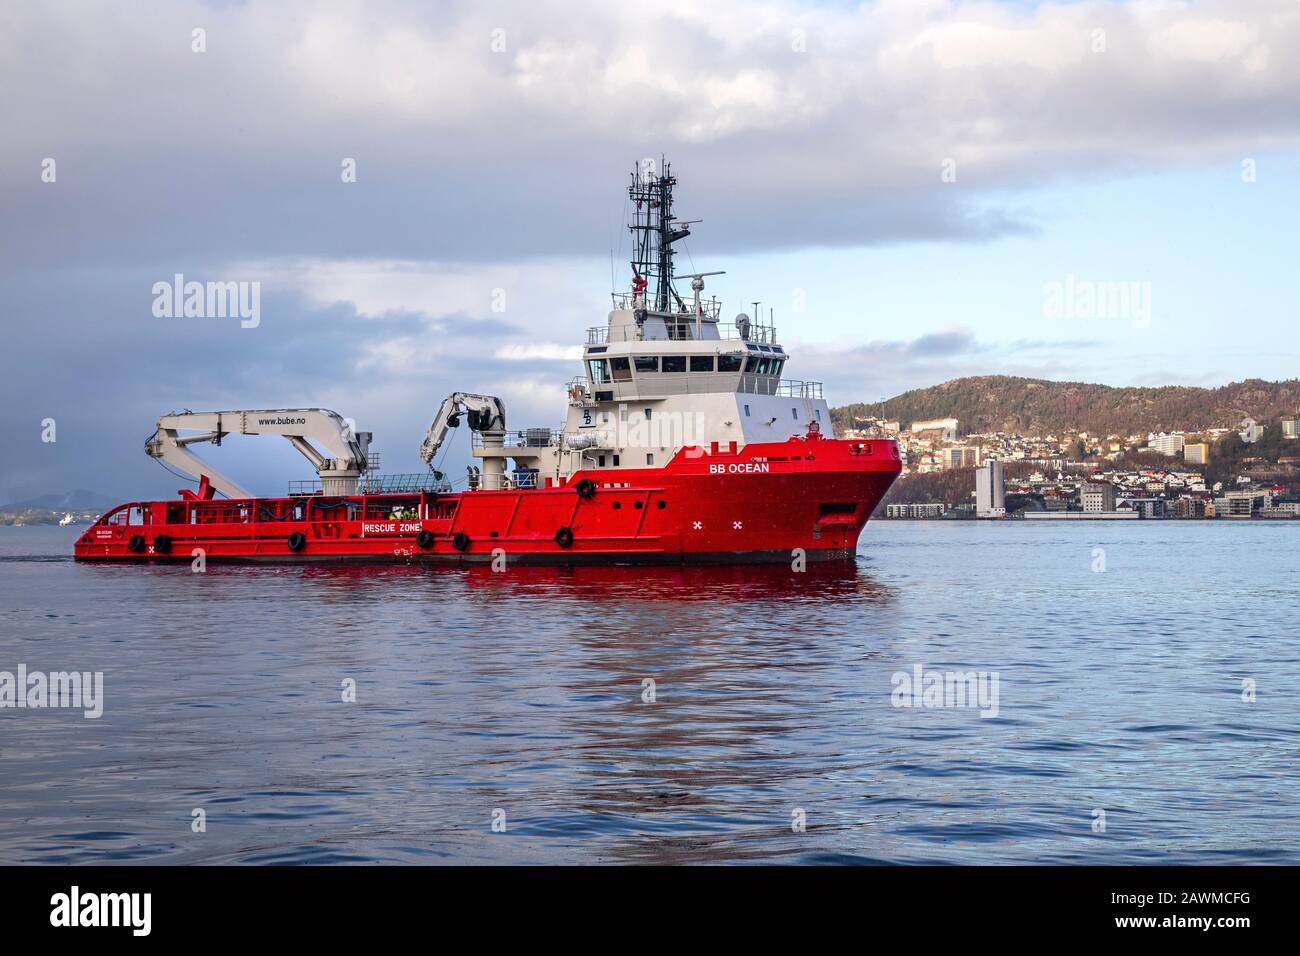 Offshore supply AHTS vessel BB Ocean at Byfjorden, arriving the port of Bergen, Norway. A rainy, dark winter day Stock Photo